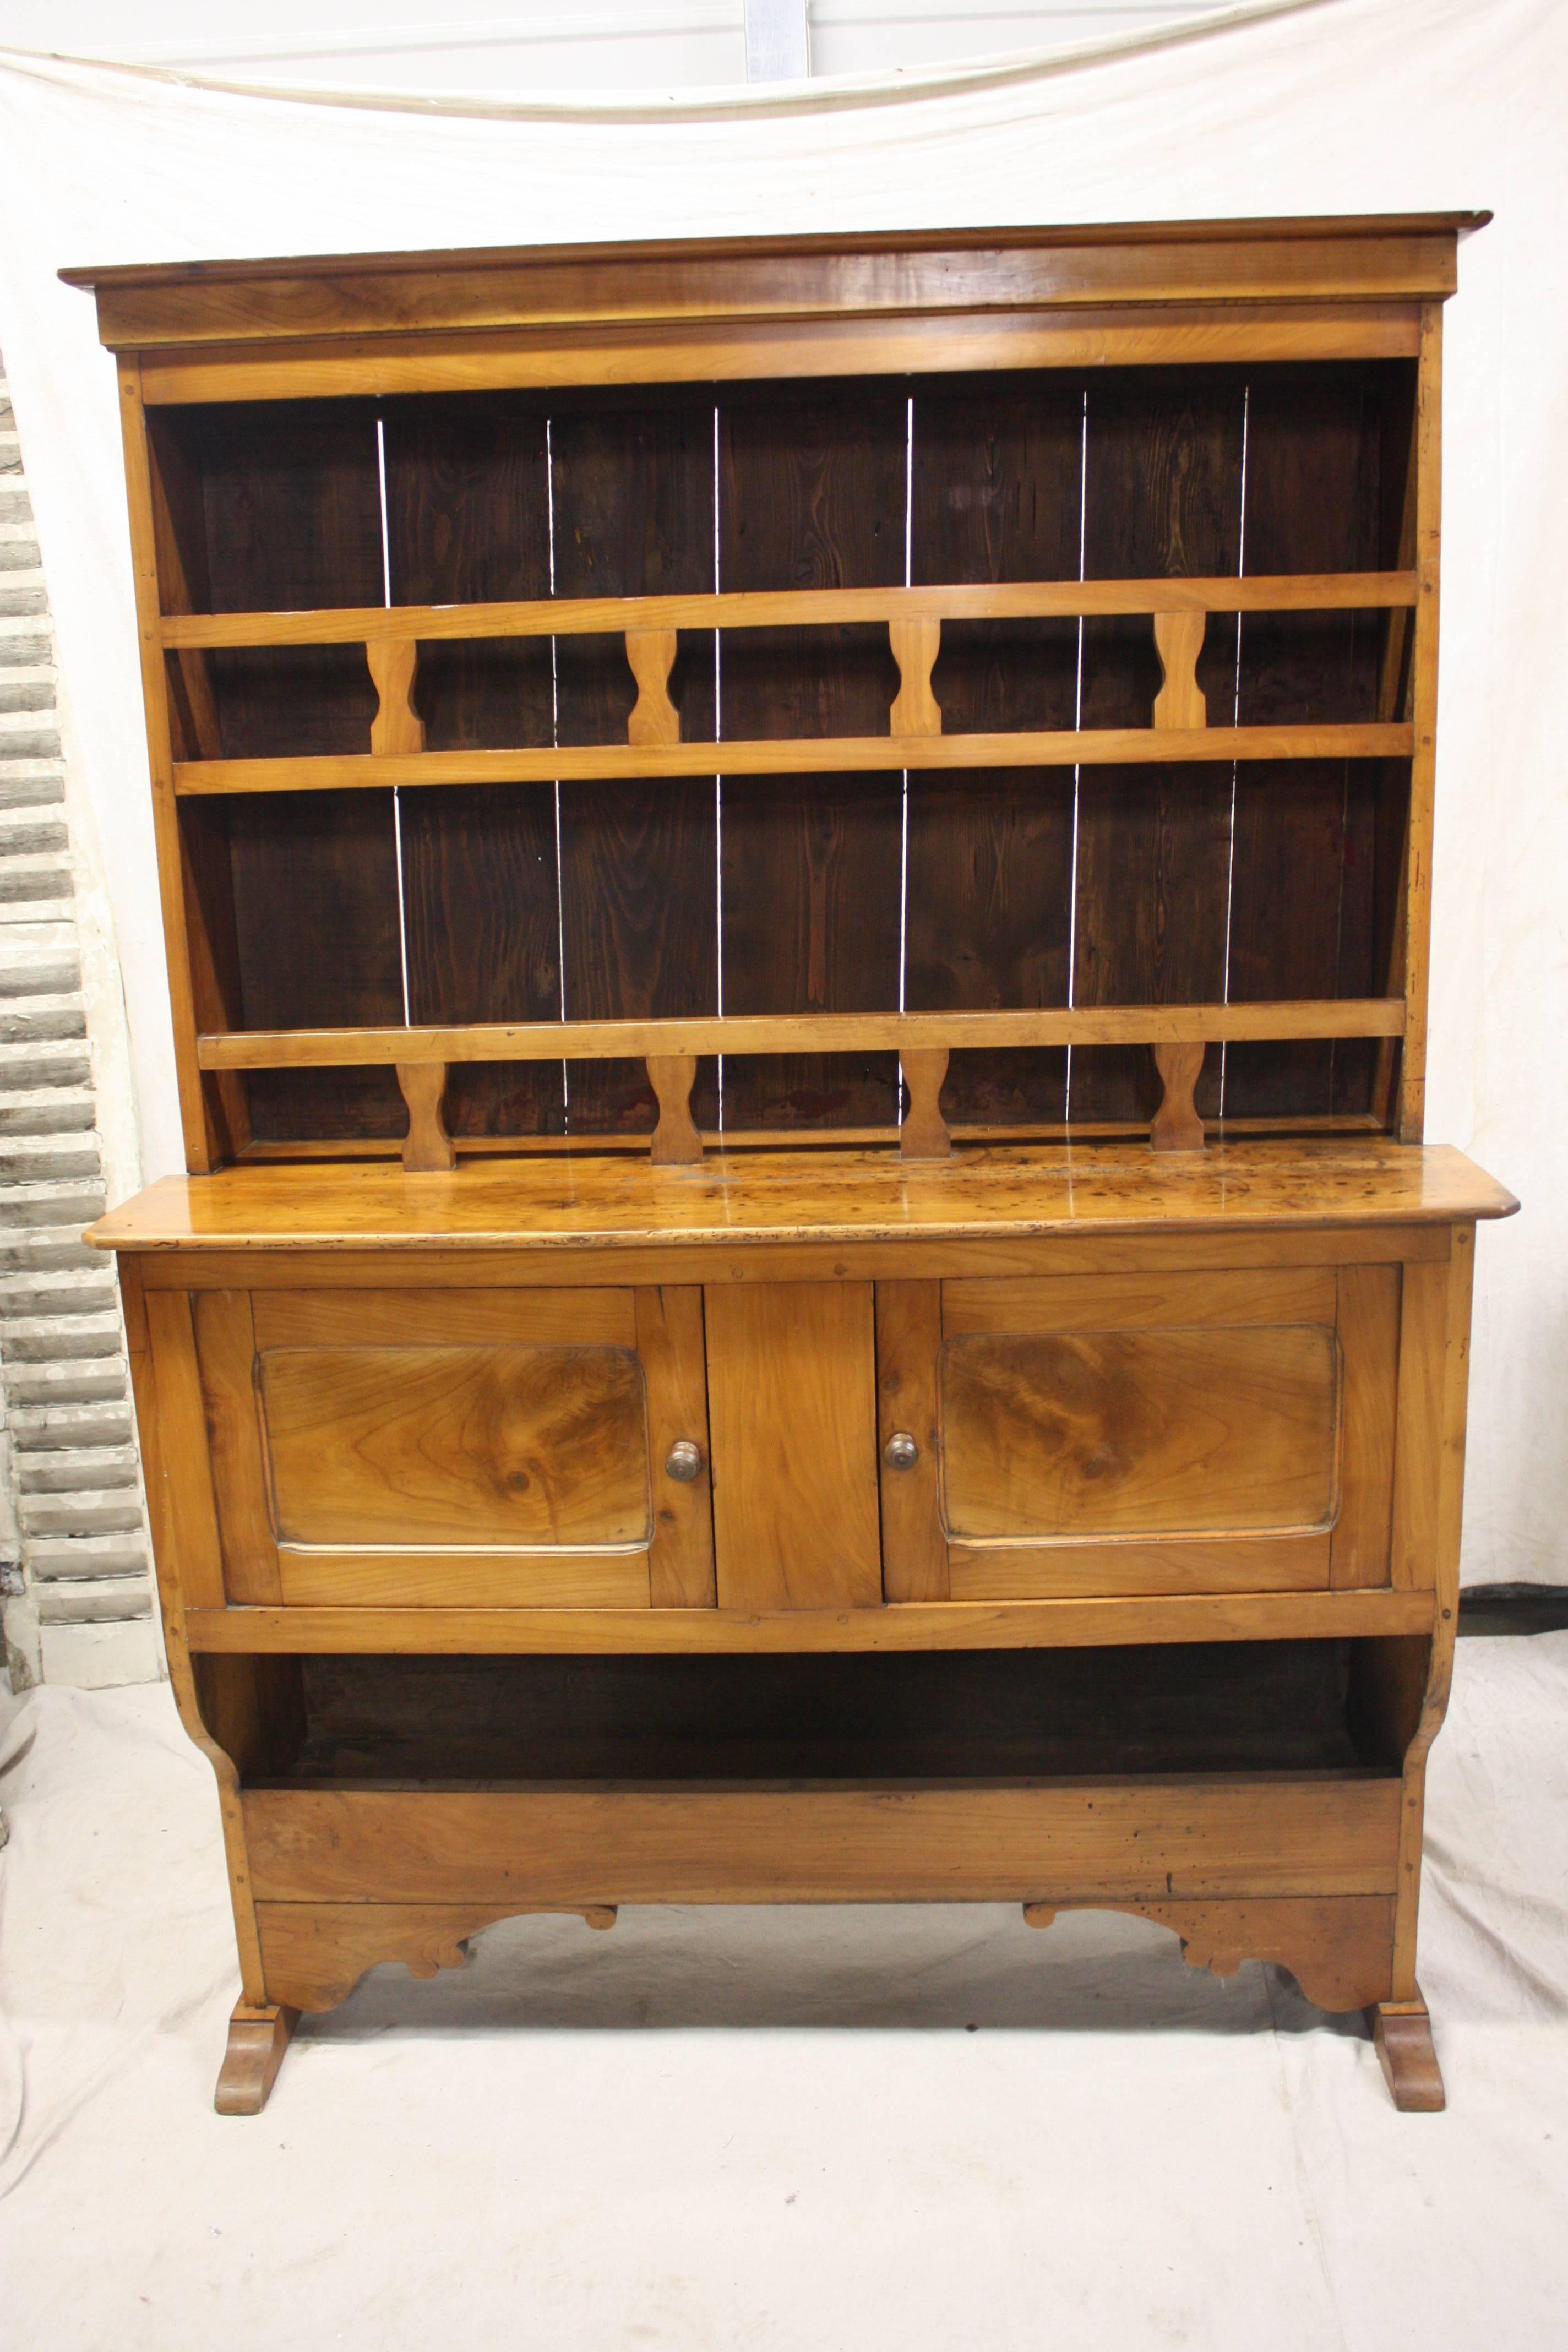 19th century French walnut hutch, very different by its shape and it wears a beautiful warm patine.